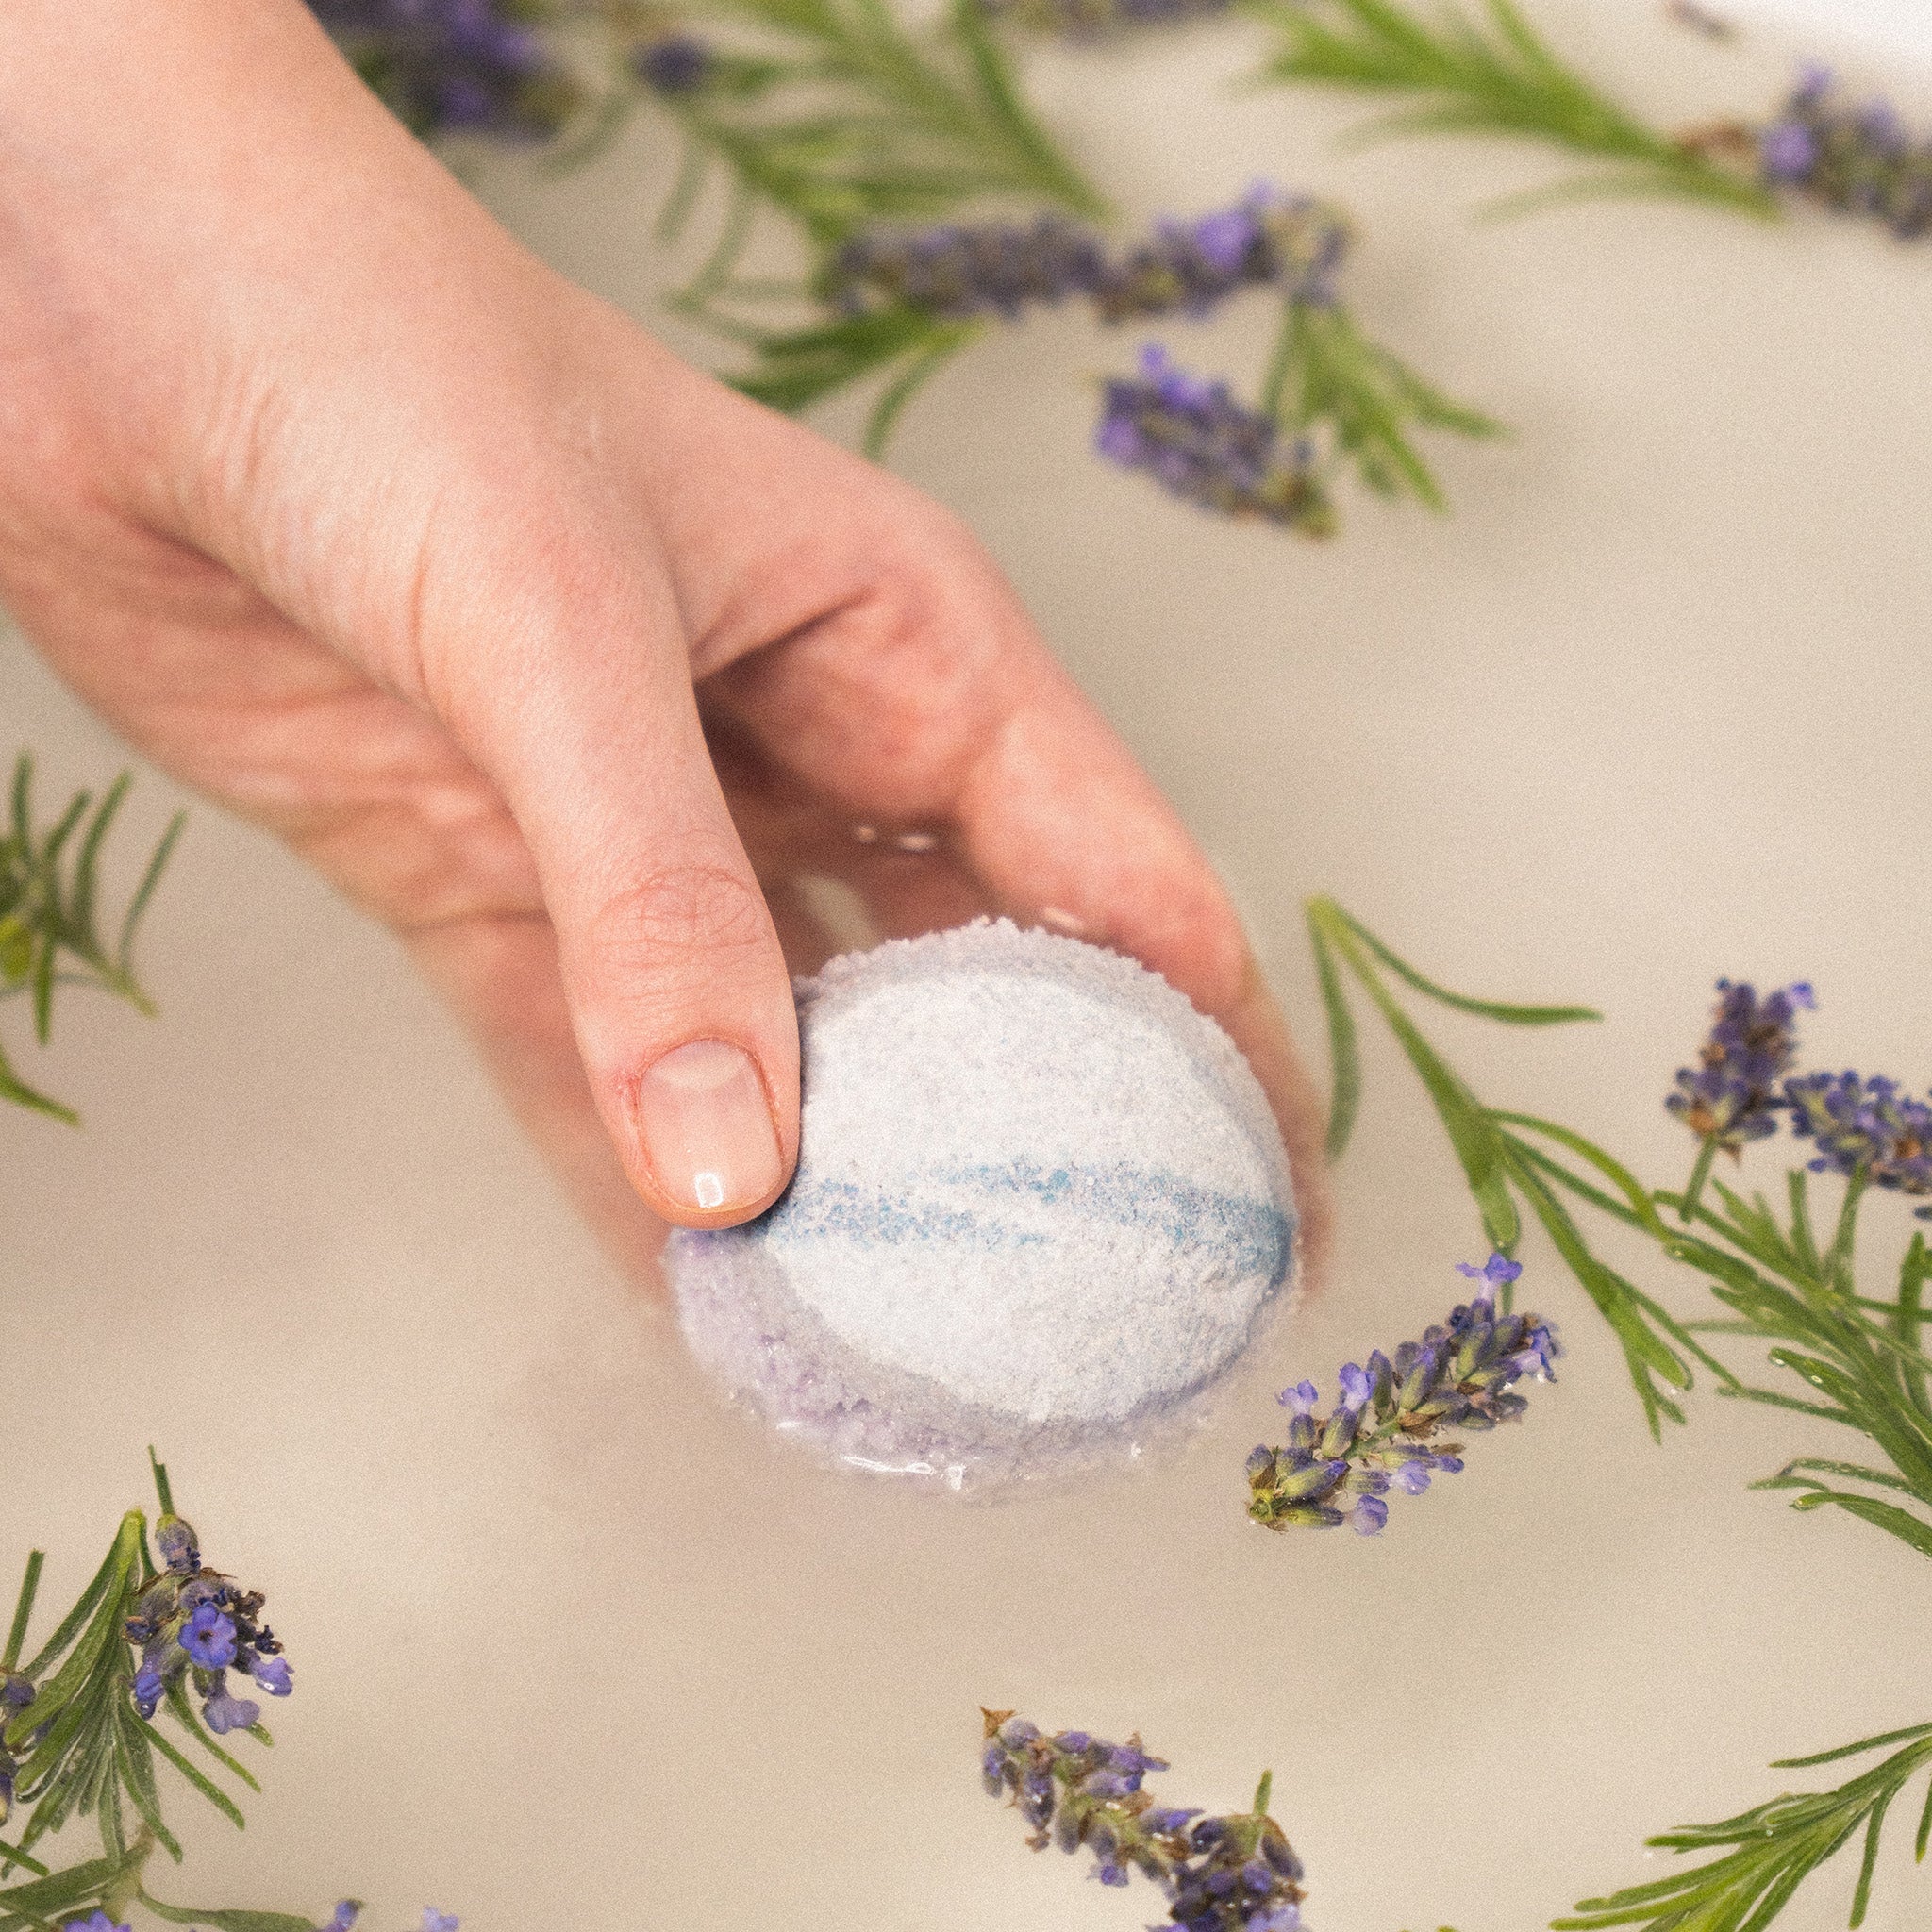 Hands holding Eir's 'Midnight Chill' bath bomb, ready to be immersed in water, for a relaxing bath experience.